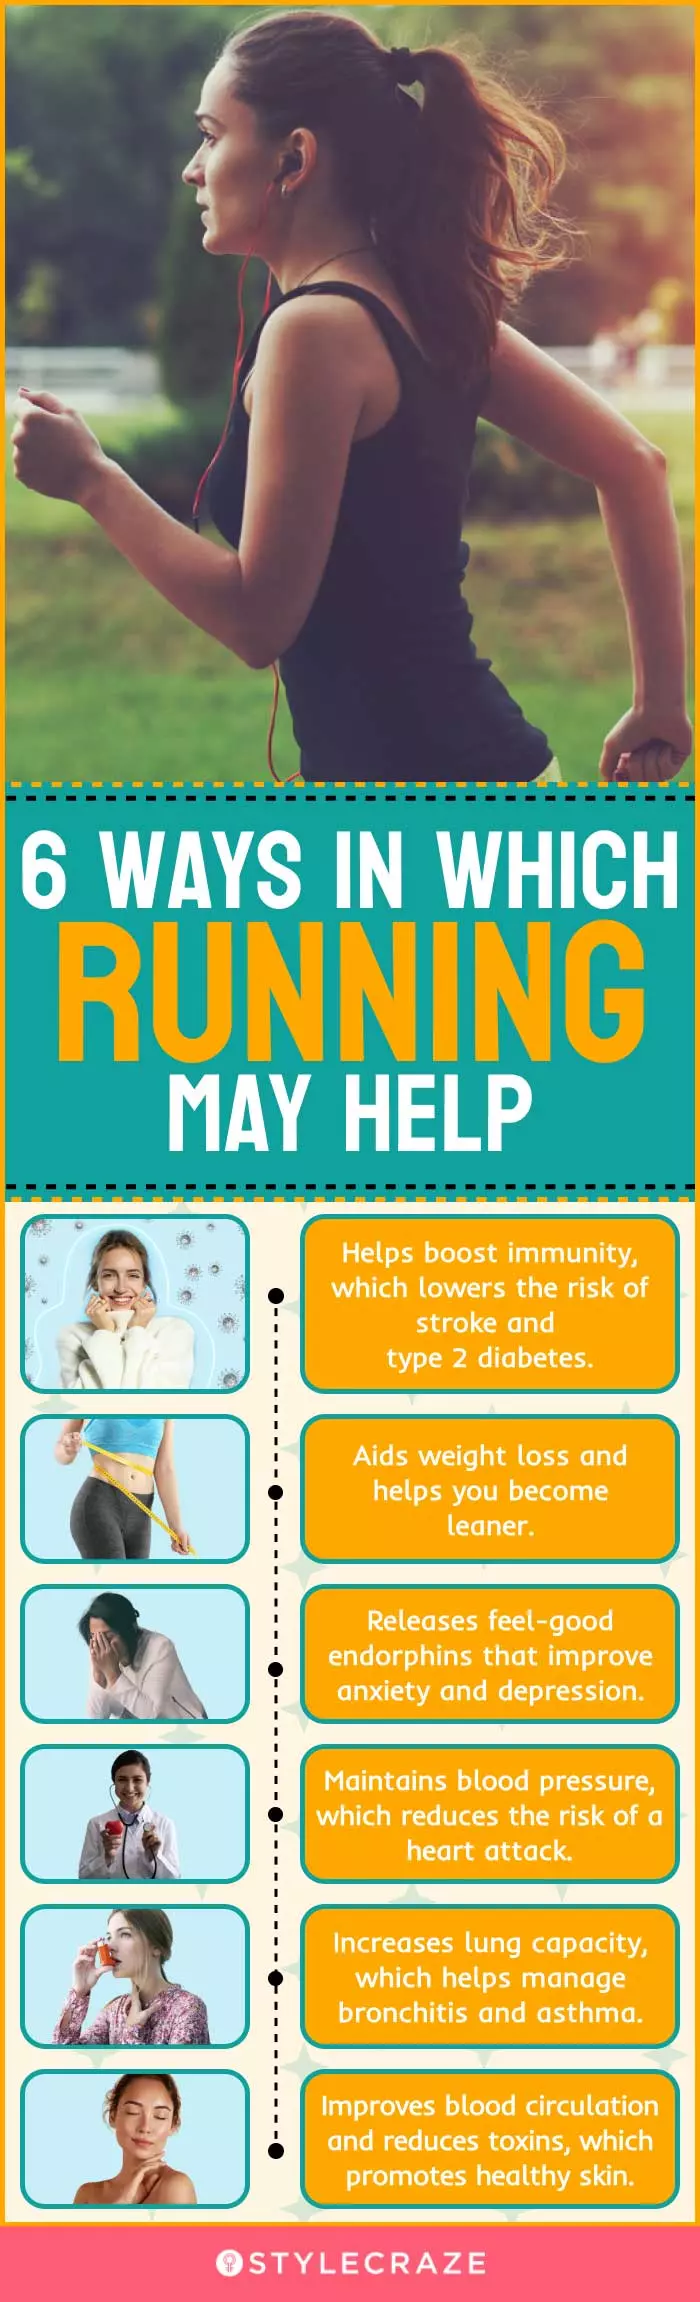 6 ways in which running may help (infographic)